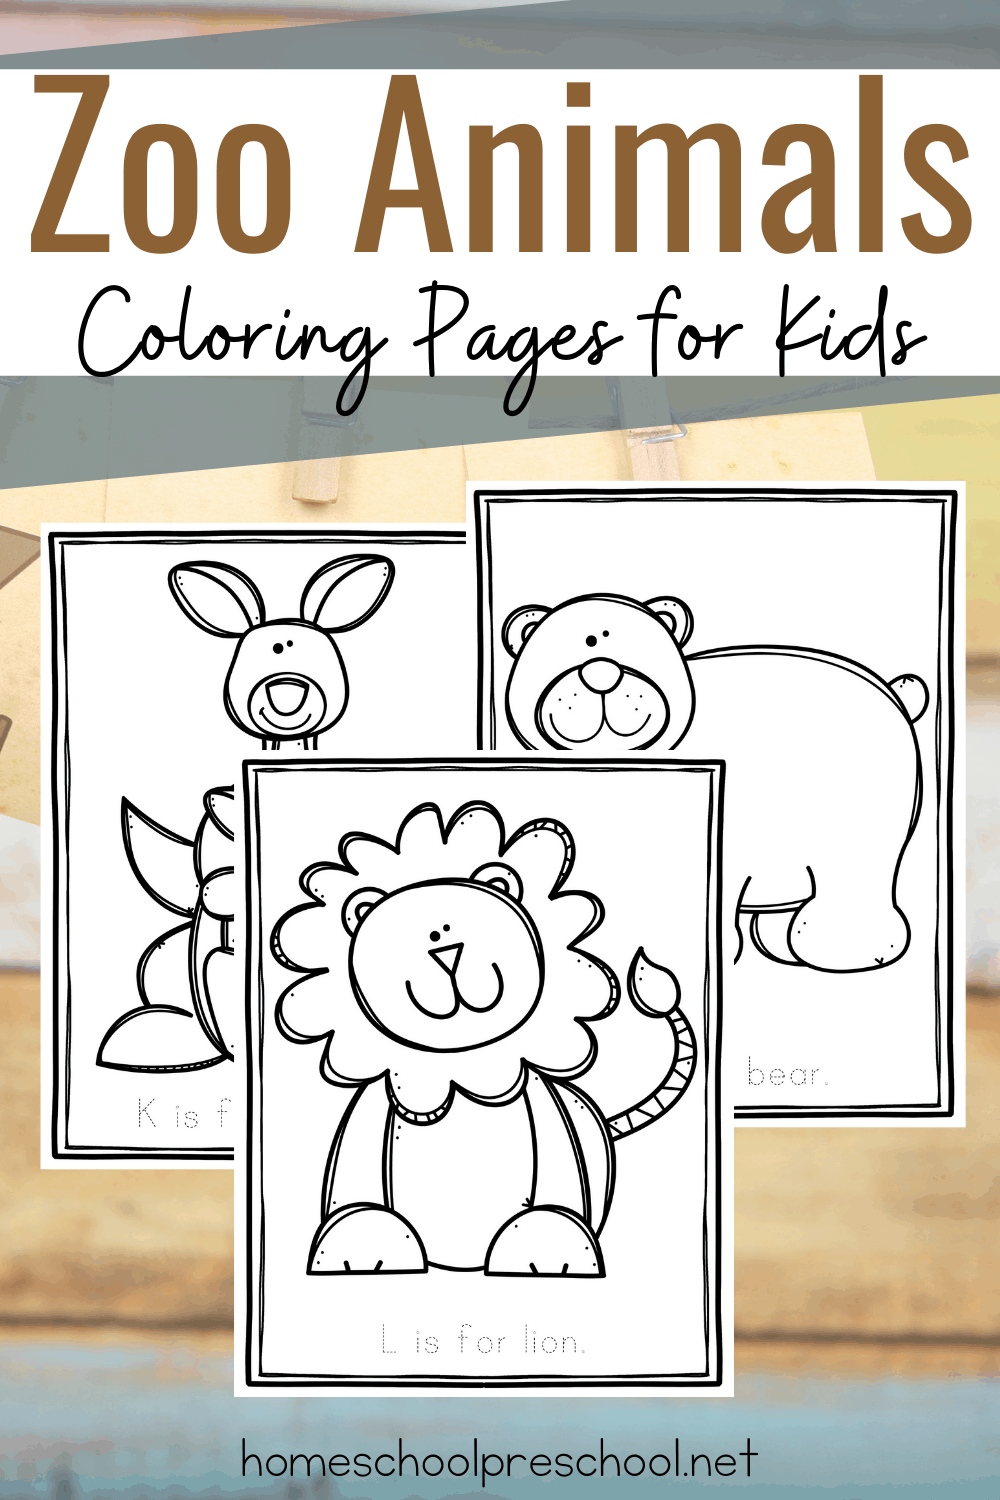 Printable Zoo Animal Coloring Pages for Preschool